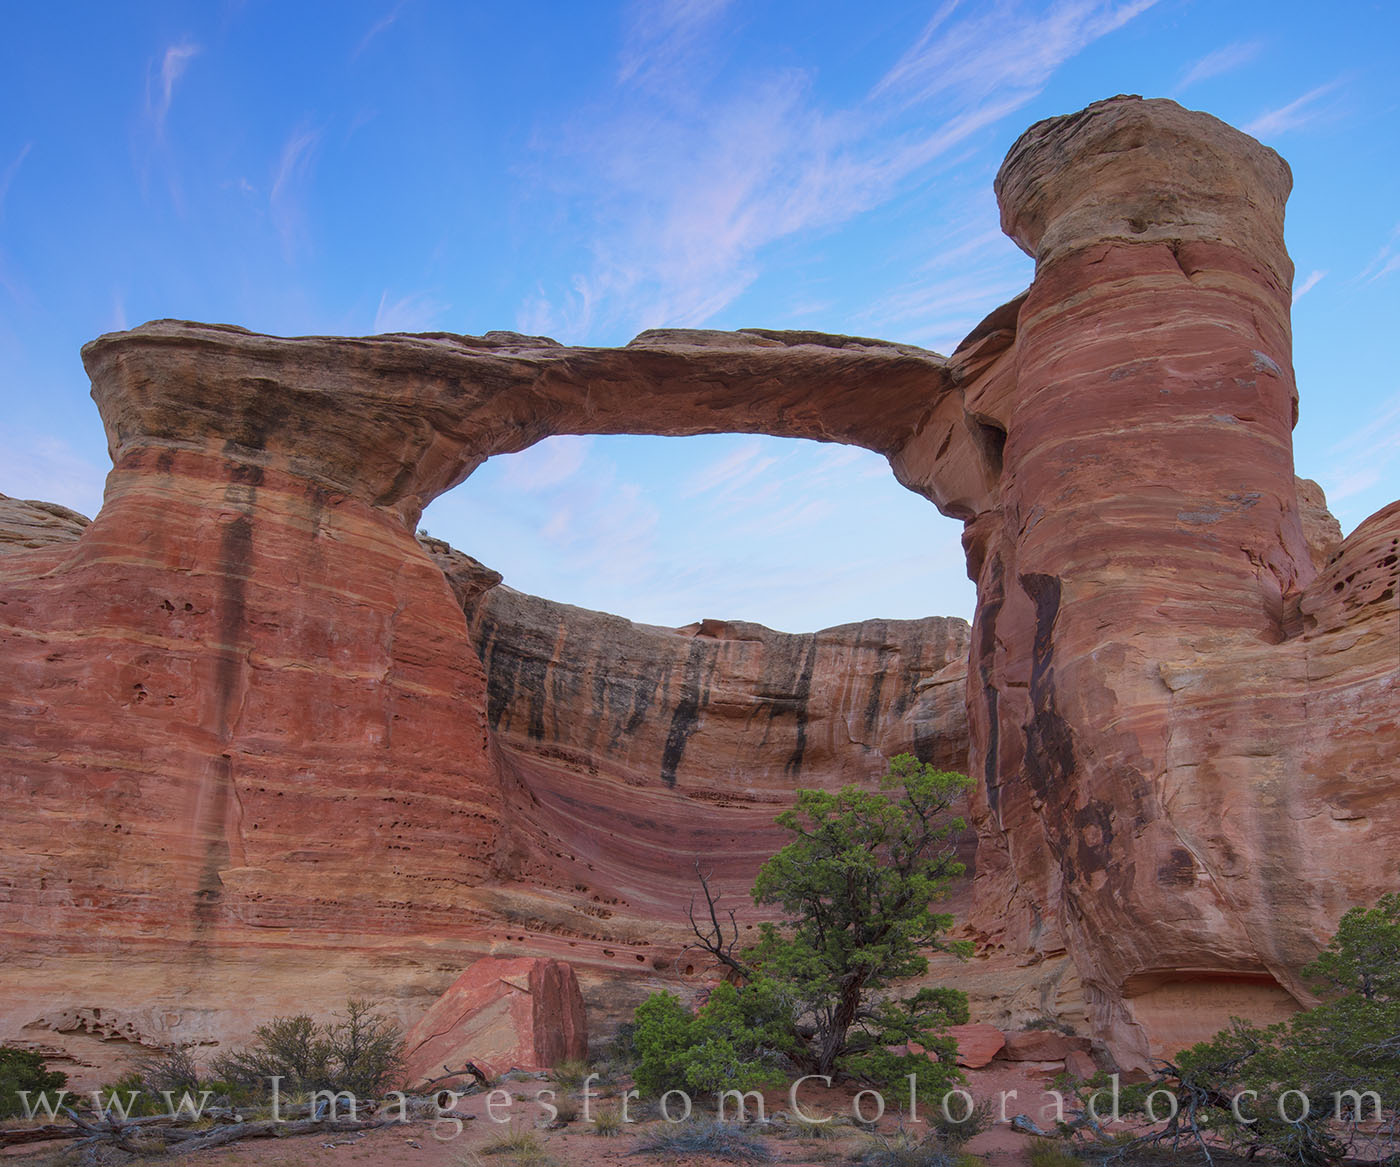 On a summer morning, the iconic Rattlesnake Arch (I’ve also seen this called Centennial Arch, Rainbow Arch, Akiti Arch, and...